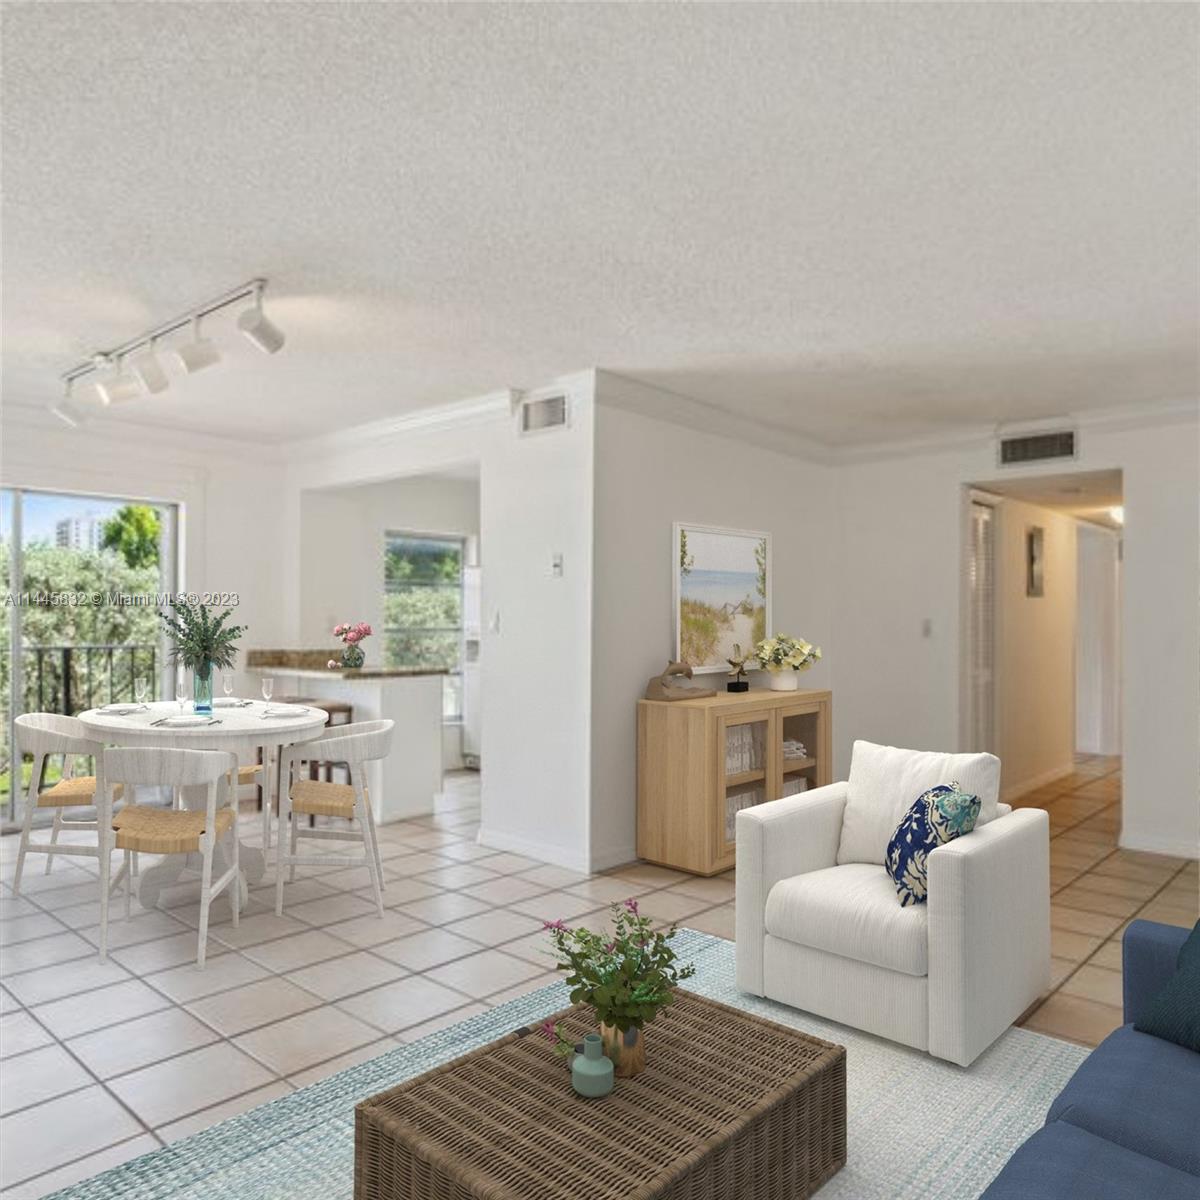 Best priced 2/2 condo in Coral Gables!  Boutique 22 unit in Ionian Plaza is centrally located in the city beautiful.  Block away from Ponce de Leon with free trolley service and Phillips Park w/ tennis courts and playground - directly behind conveniently located Publix makes this an ideal urban walkable place to call home!  Spacious and updated - with remodeled kitchen and baths, tiled throughout, New central A/C, stackable washer/dryer, 1 covered parking space plus guest parking, wonderful pool plus each unit comes with a separate storage space.  Low maintenance $610/mo, intercom entry to building. No Special assessments and bldg has general reserves. The 40 + 10 year re-certification has been completed.  Building has a new roof and newer elevator. Easy to show, vacant.